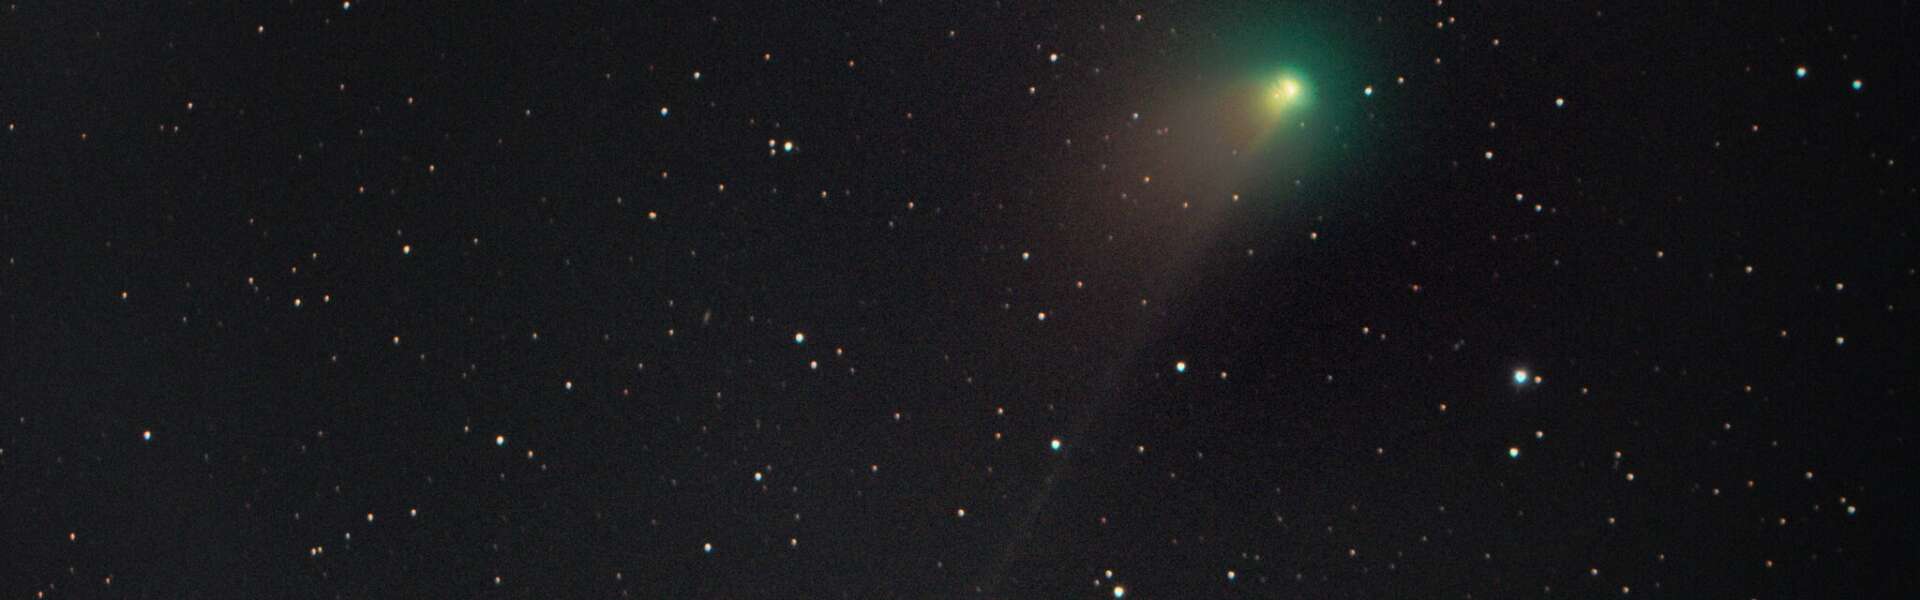 A green comet in a starry sky